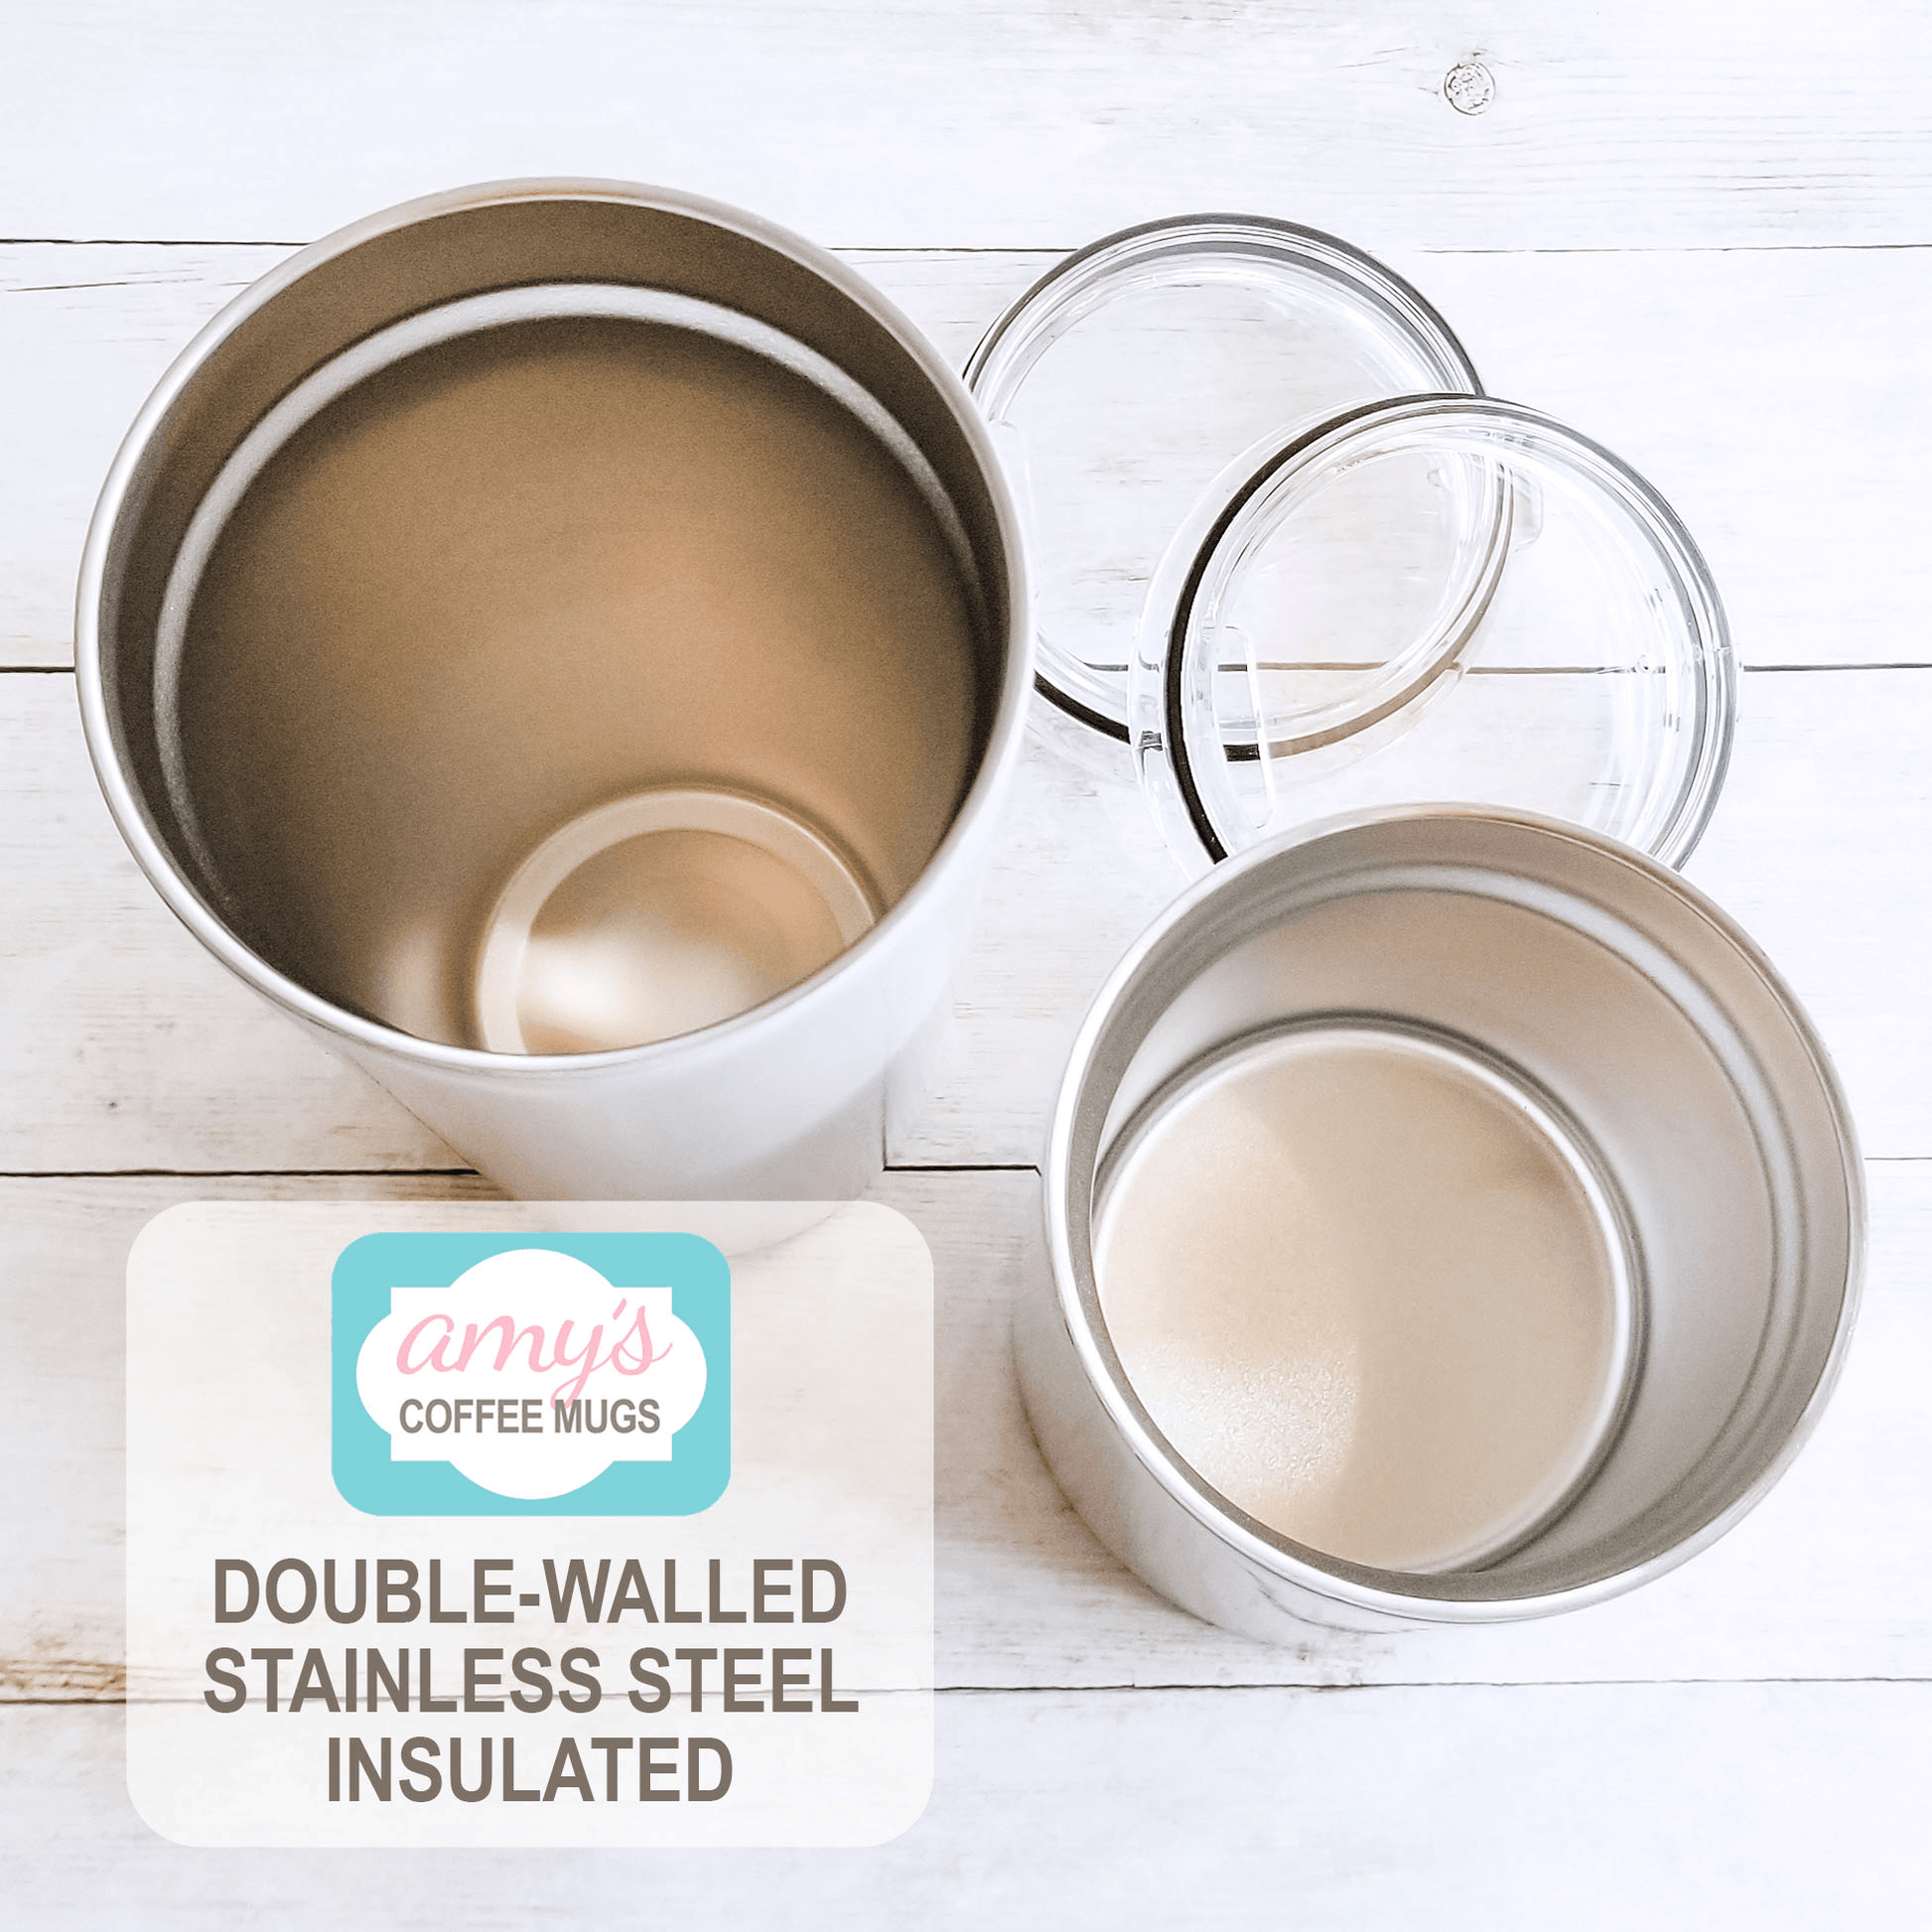 Double-walled stainless steel insulated Tumbler Cups at Amy's Coffee Mugs